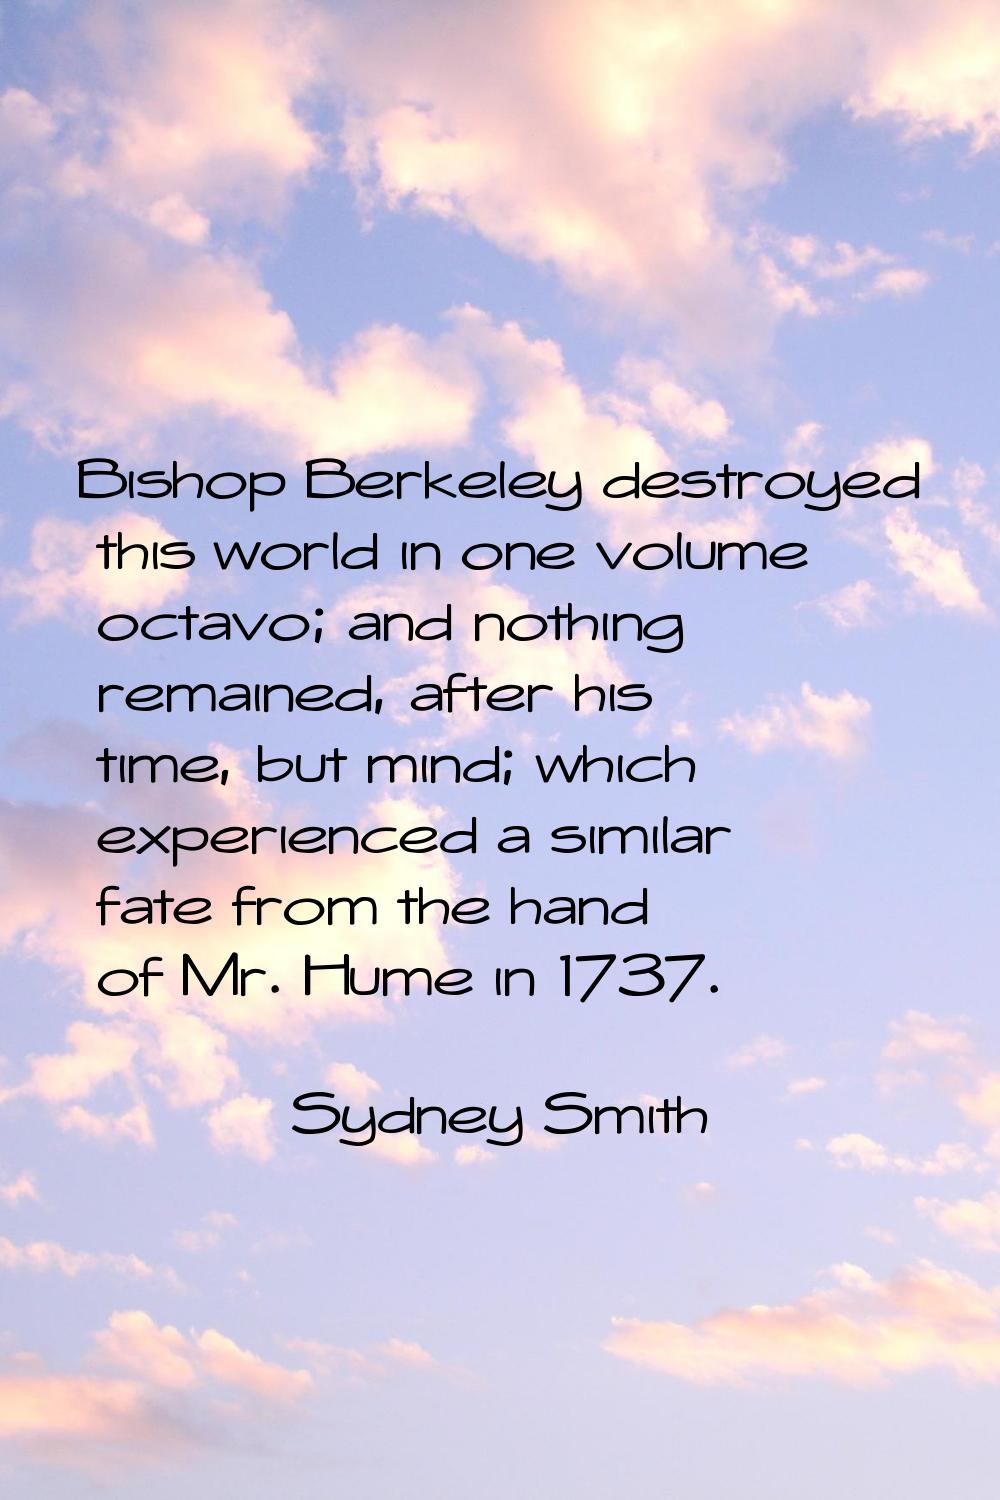 Bishop Berkeley destroyed this world in one volume octavo; and nothing remained, after his time, bu